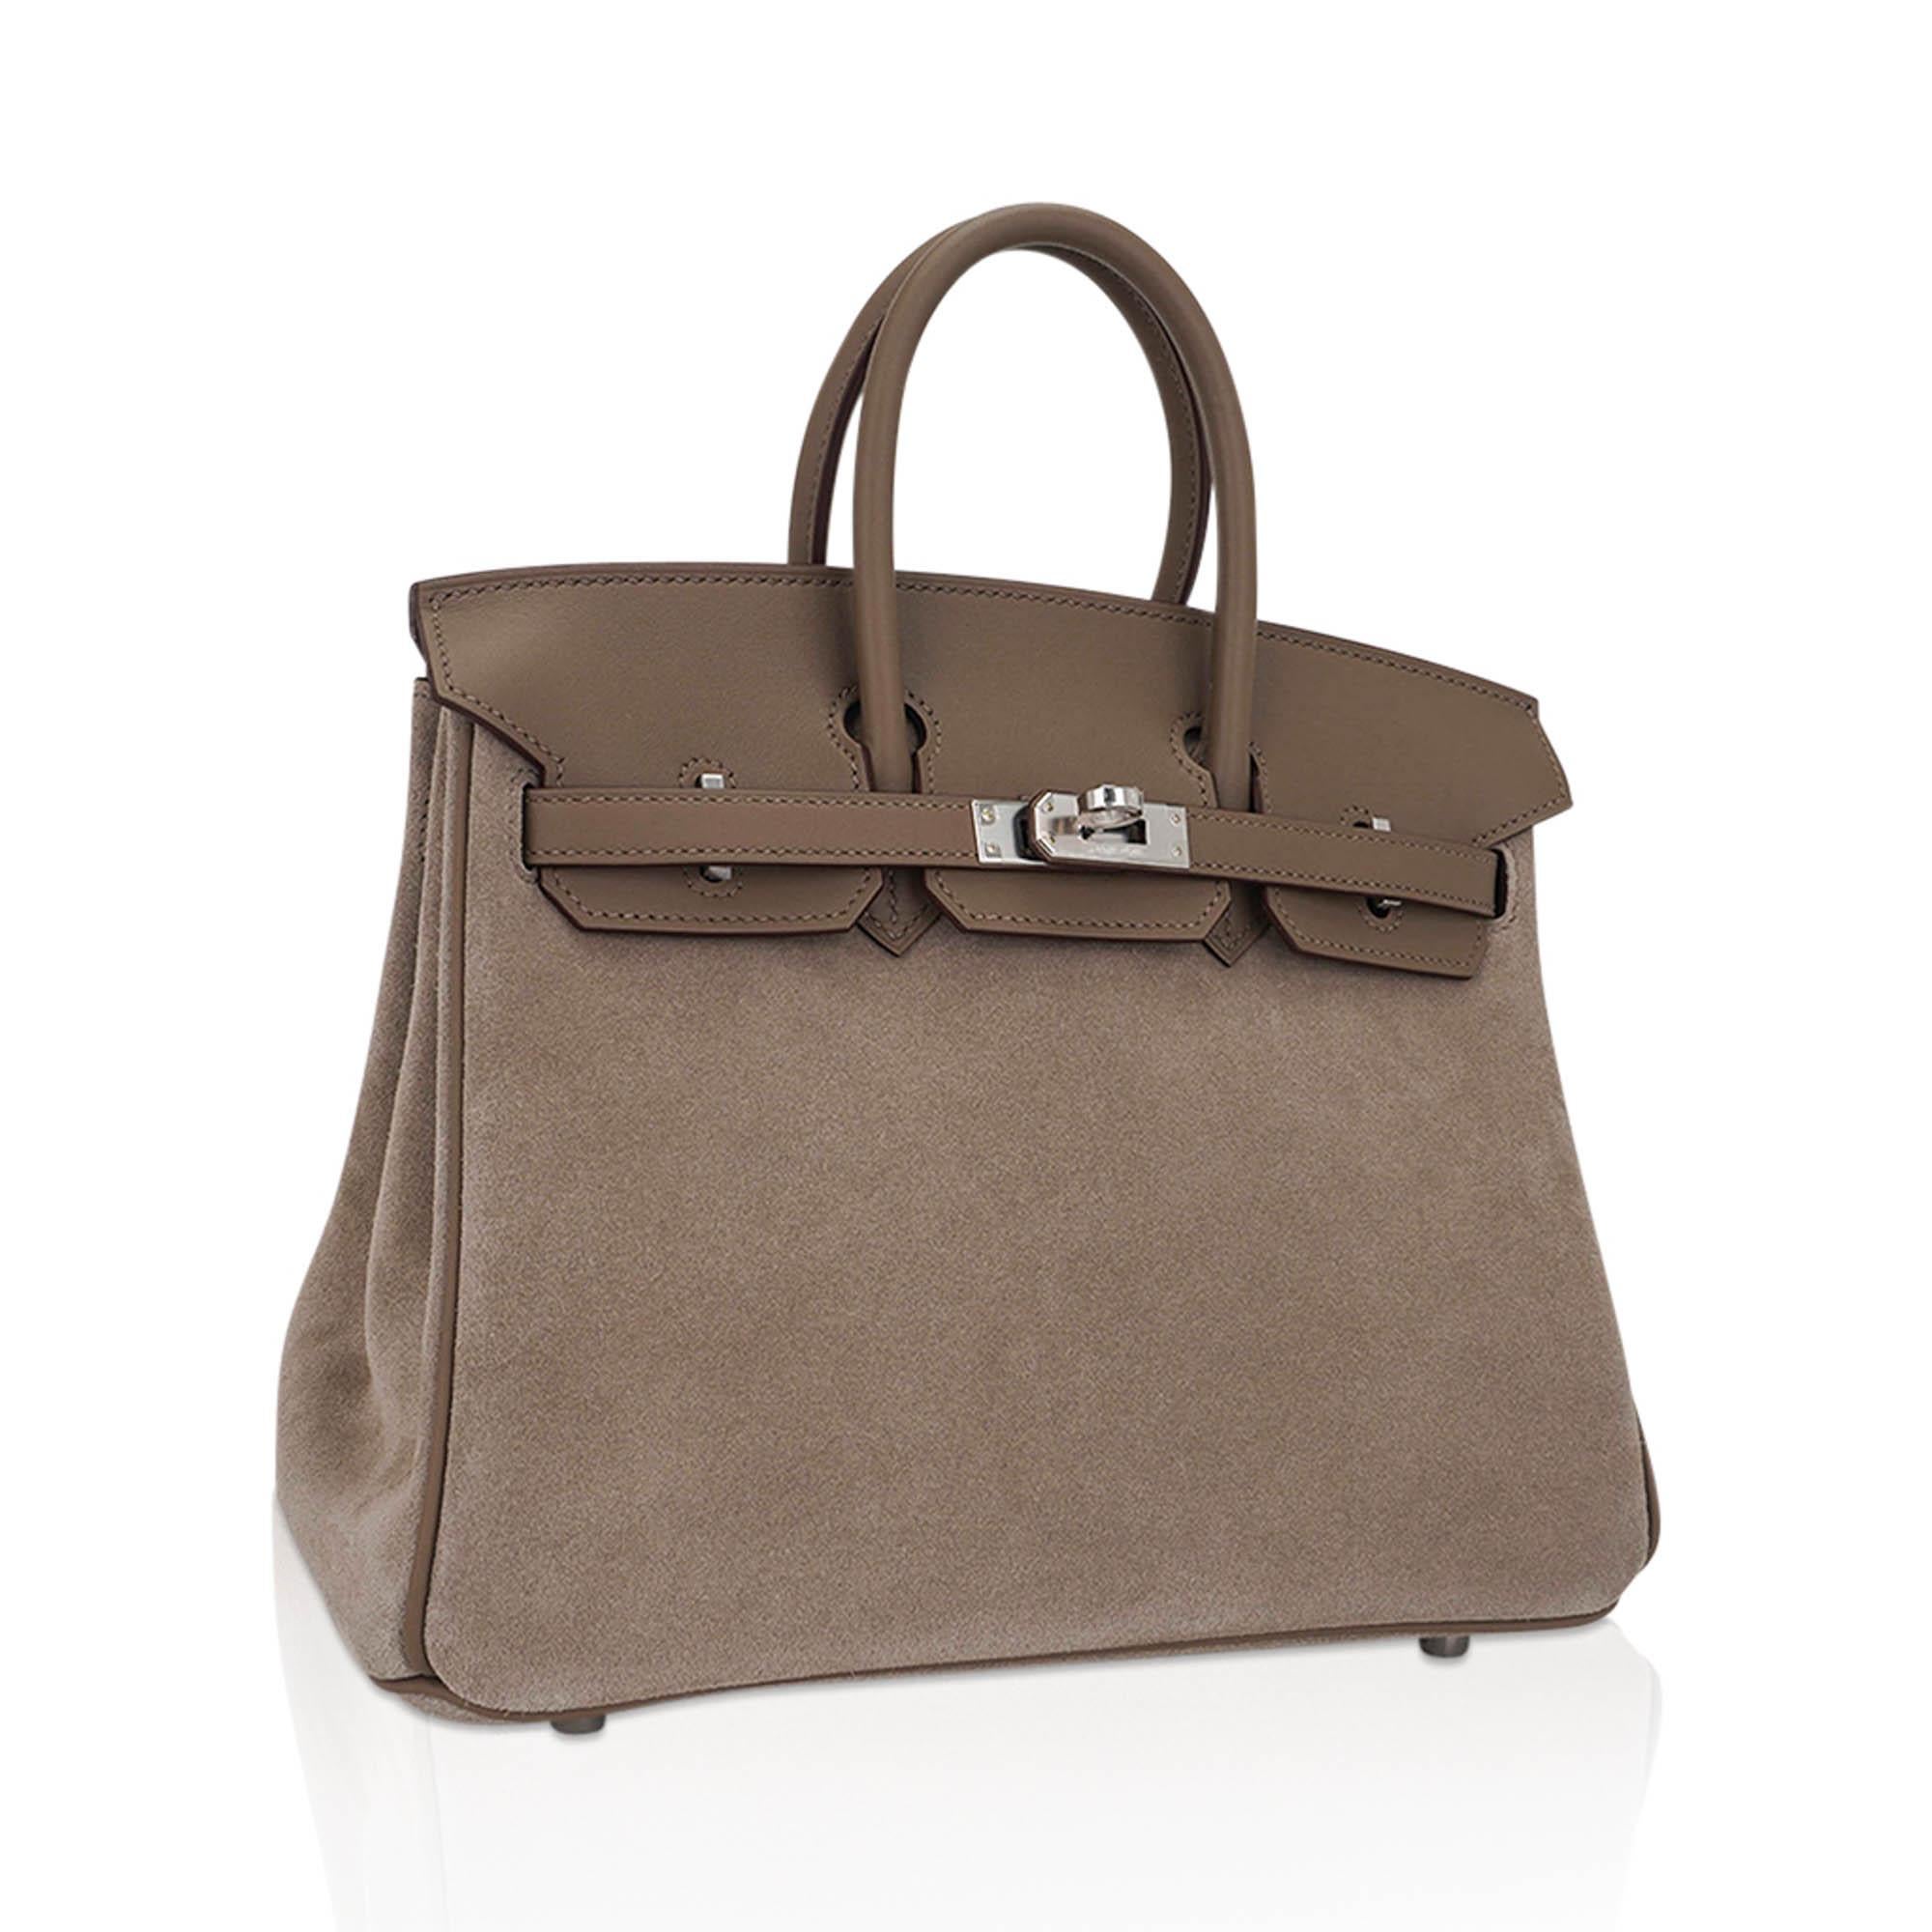 Mightychic offers an Hermes Birkin 25 limited edition Grizzly bag featured in Gris Caillou and Etoupe.
Rarely produced this soft Doblis (suede) body is accentuated with Etoupe swift leather.
Exquisite colour combination that is neutral and perfect